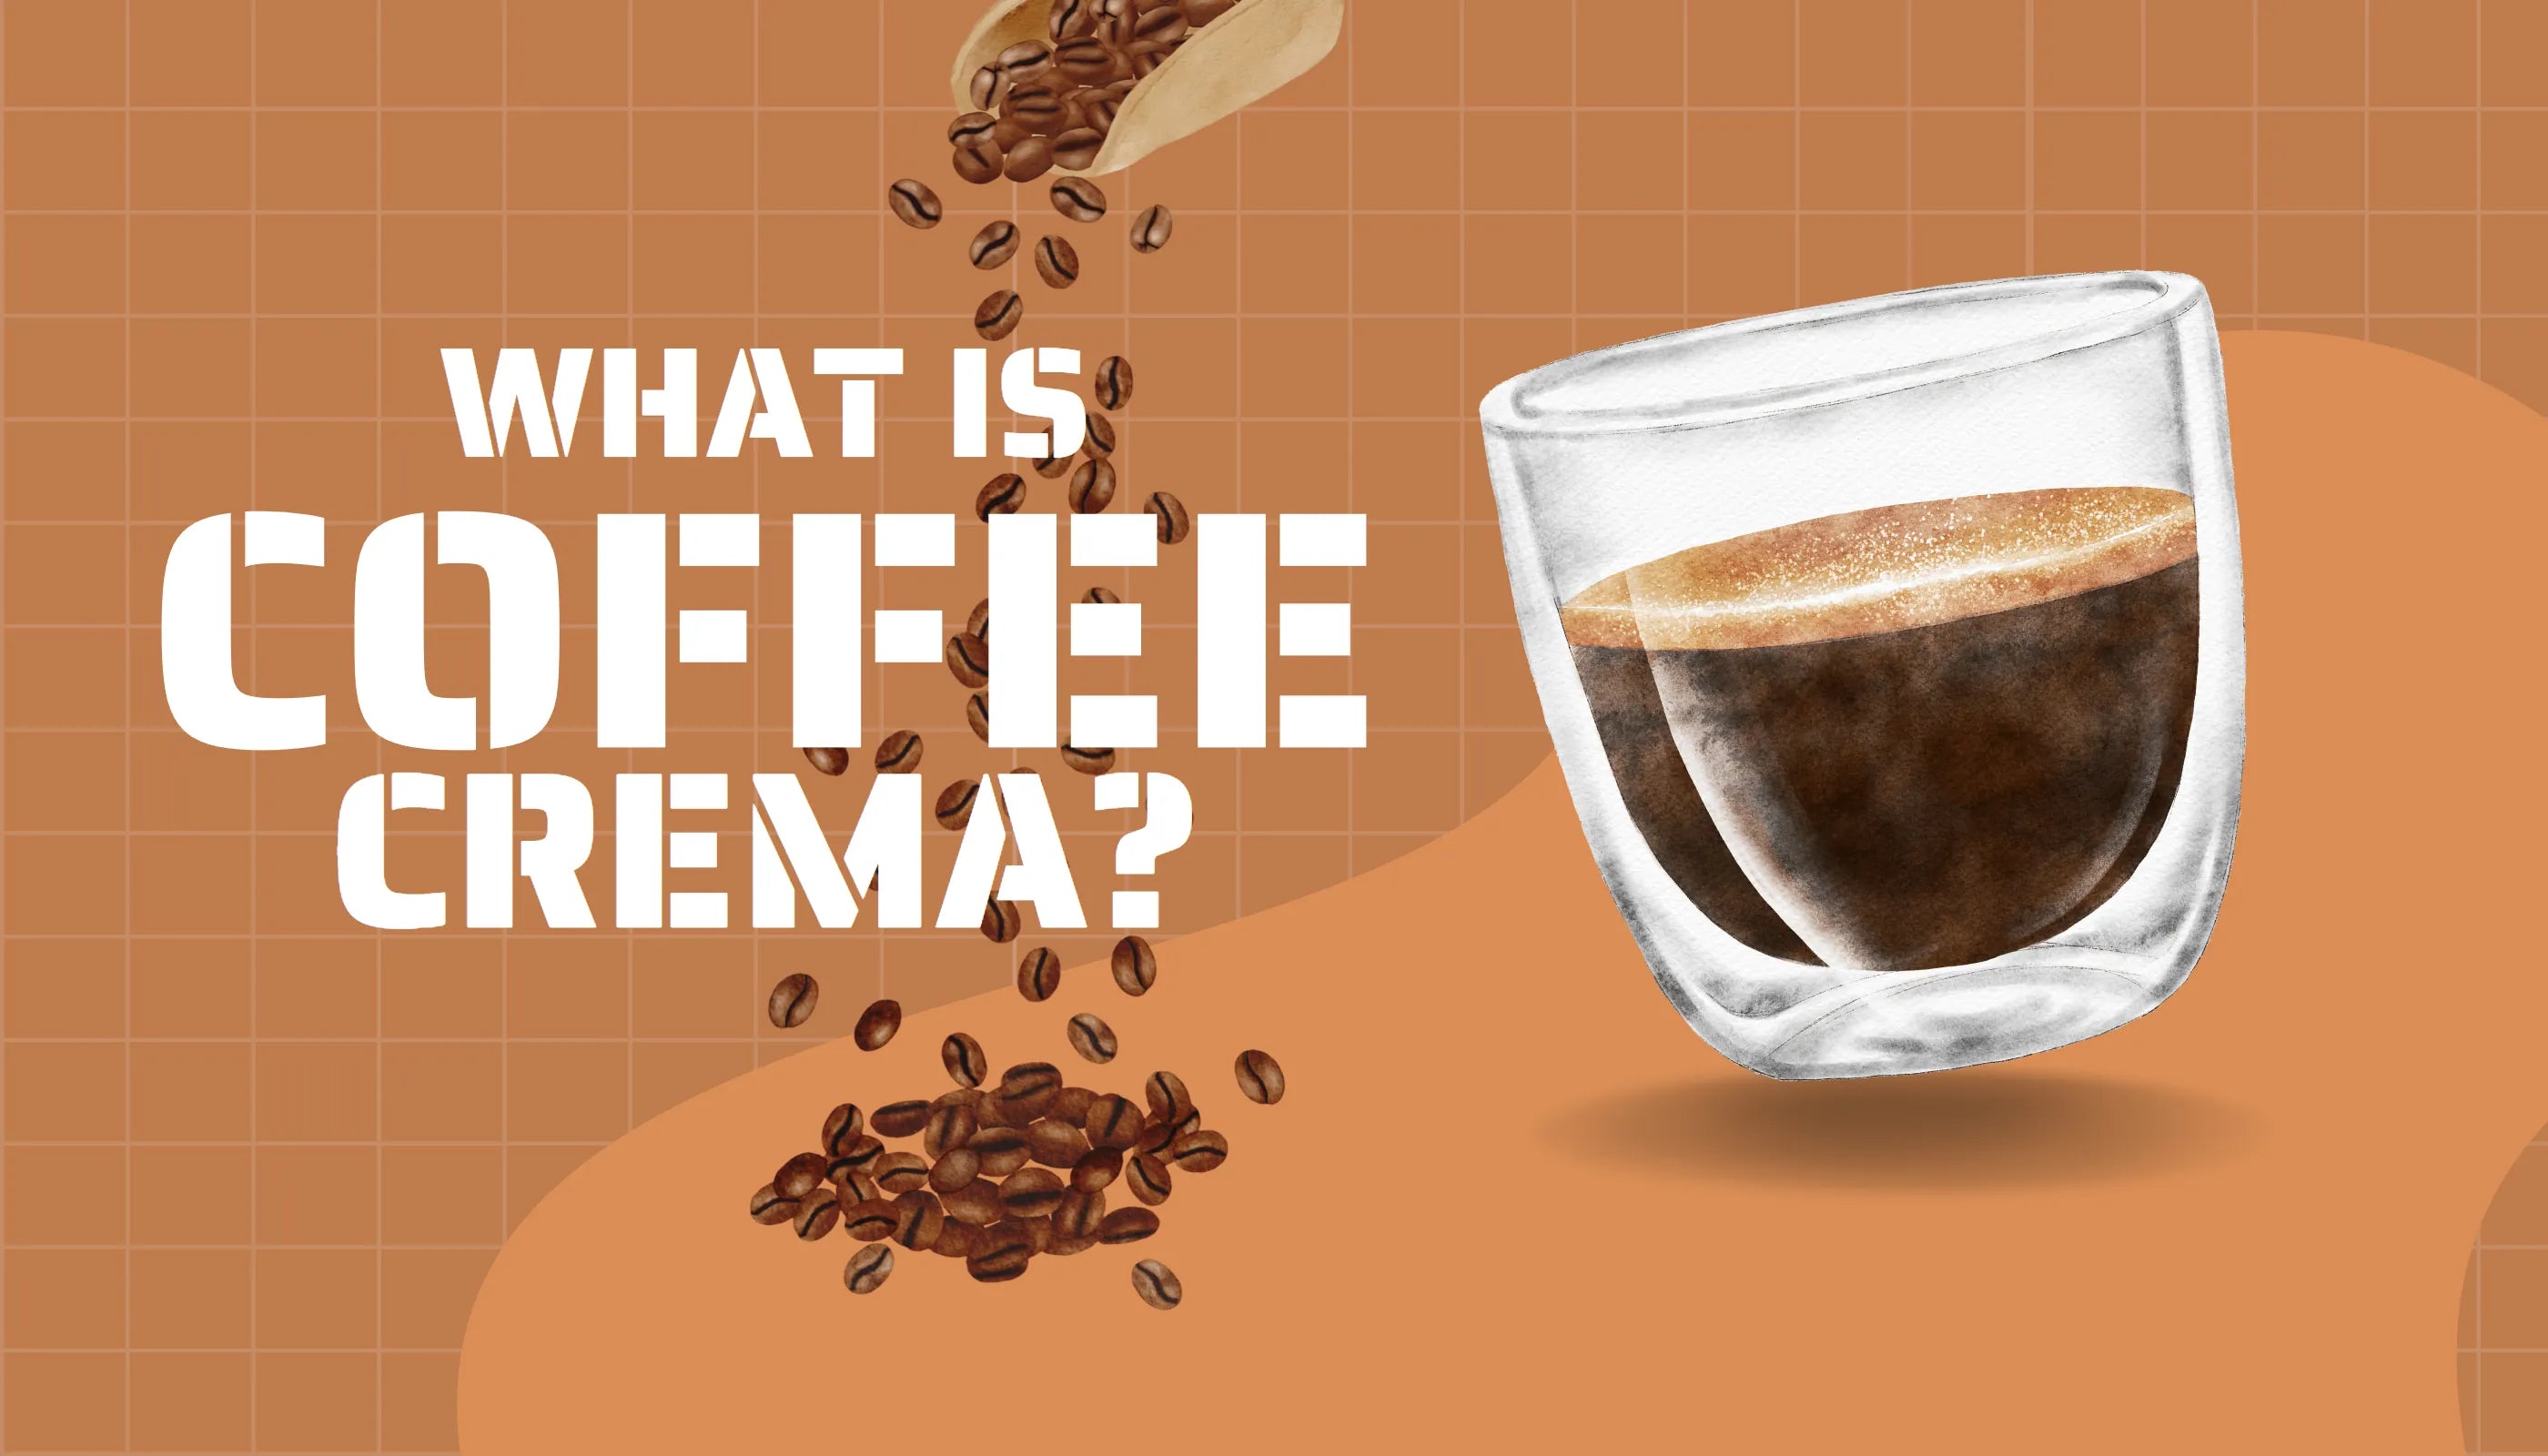 Ever Wondered Why Crema Happens?